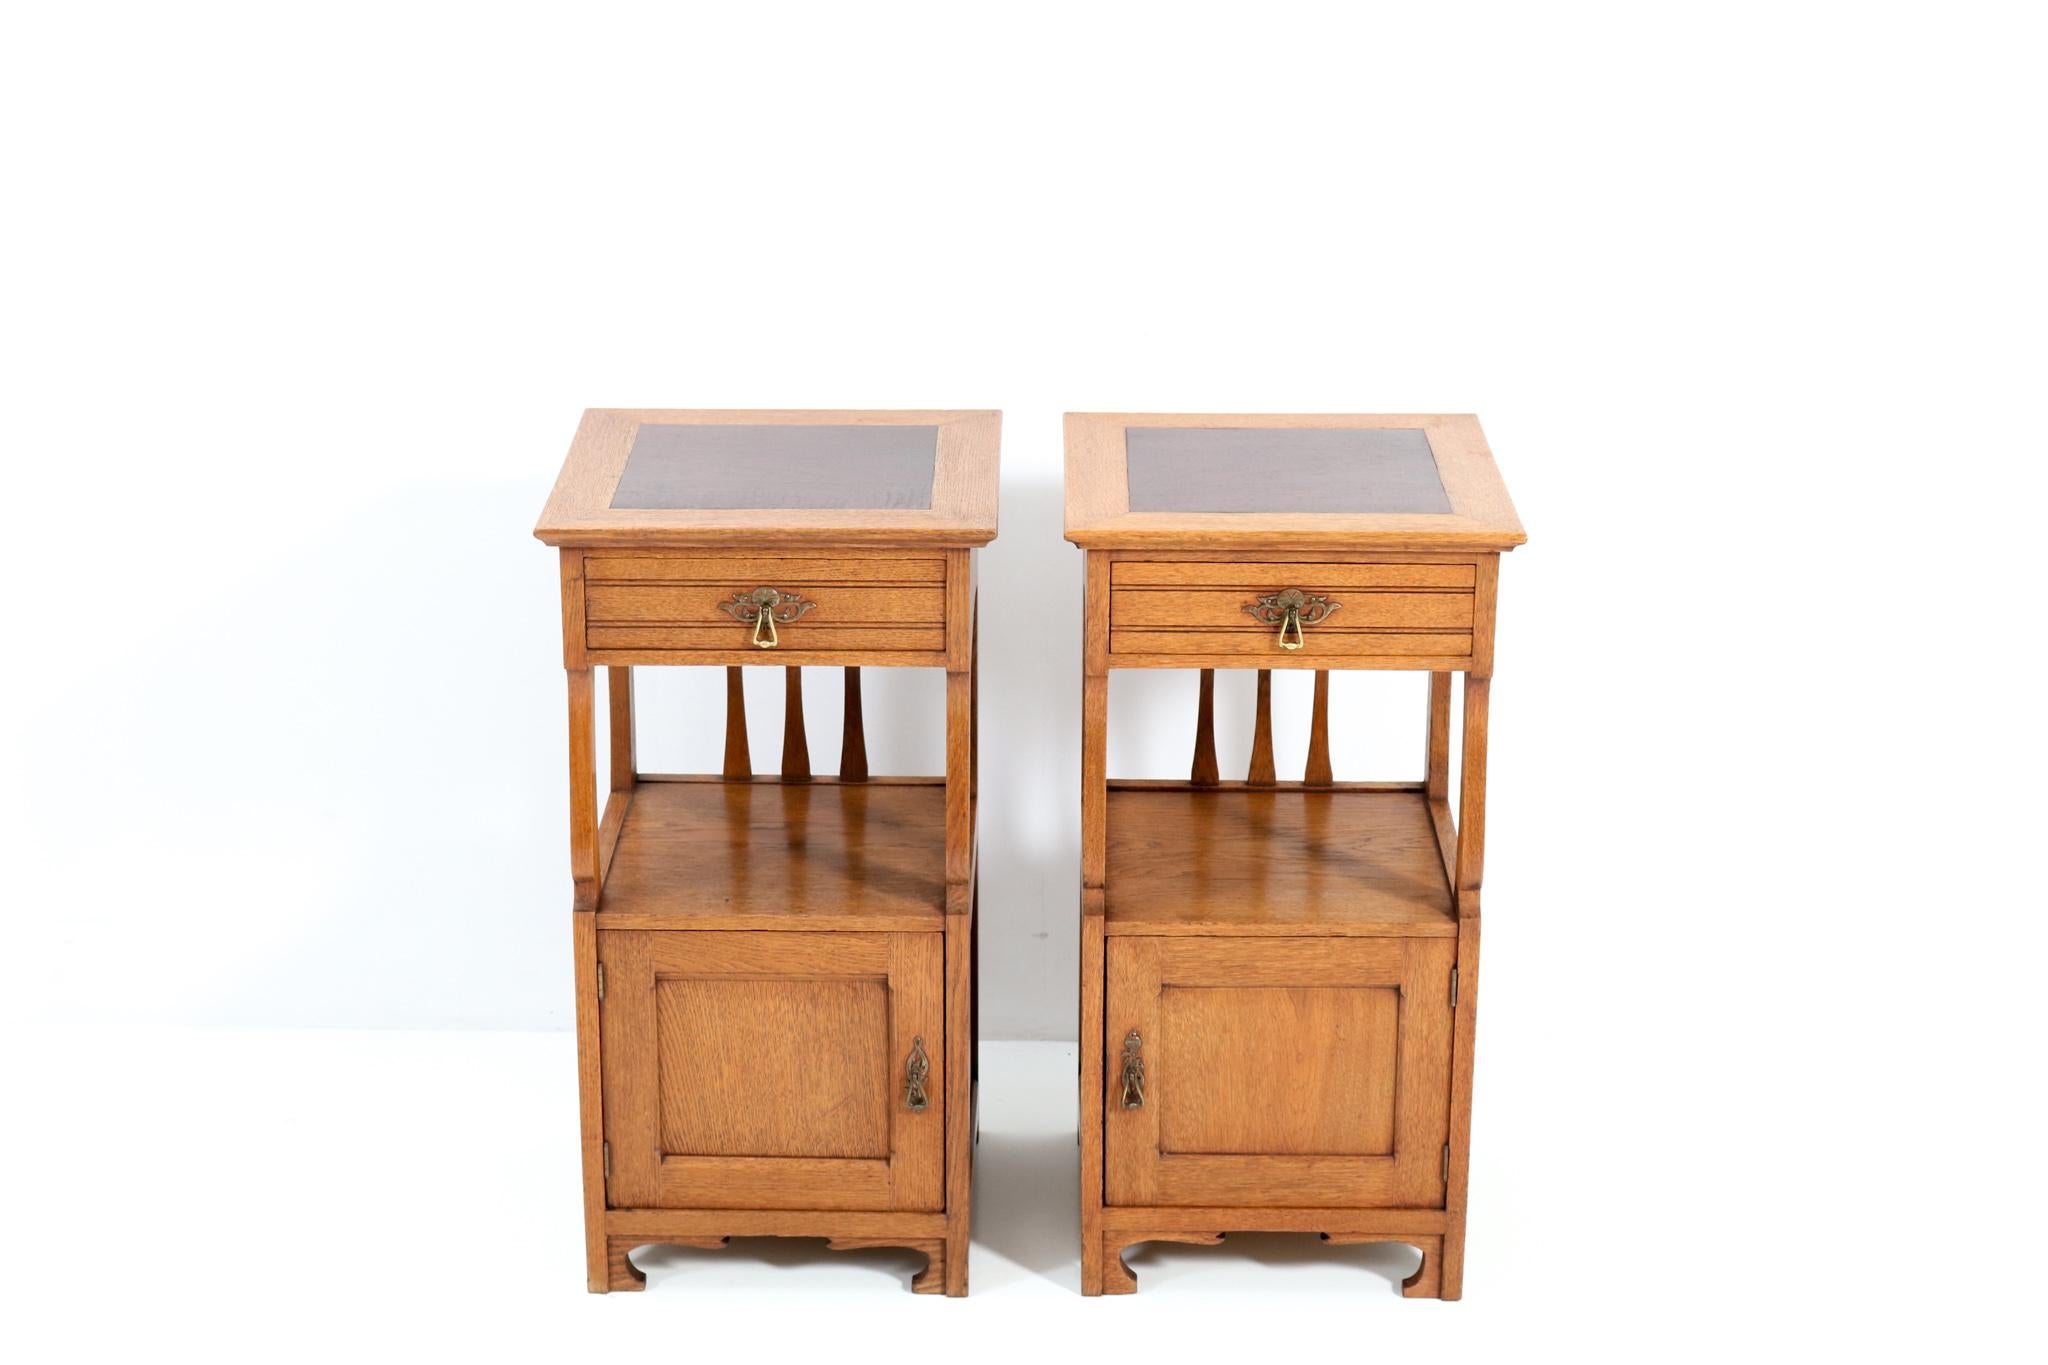 Stunning and rare pair of Art Nouveau Arts & Crafts nightstands or bedside tables.
Striking Belgium design of the 1900s.
Solid oak with original brass handles on drawers and doors.
The tops are inlaid with walnut.
The design of this wonderful